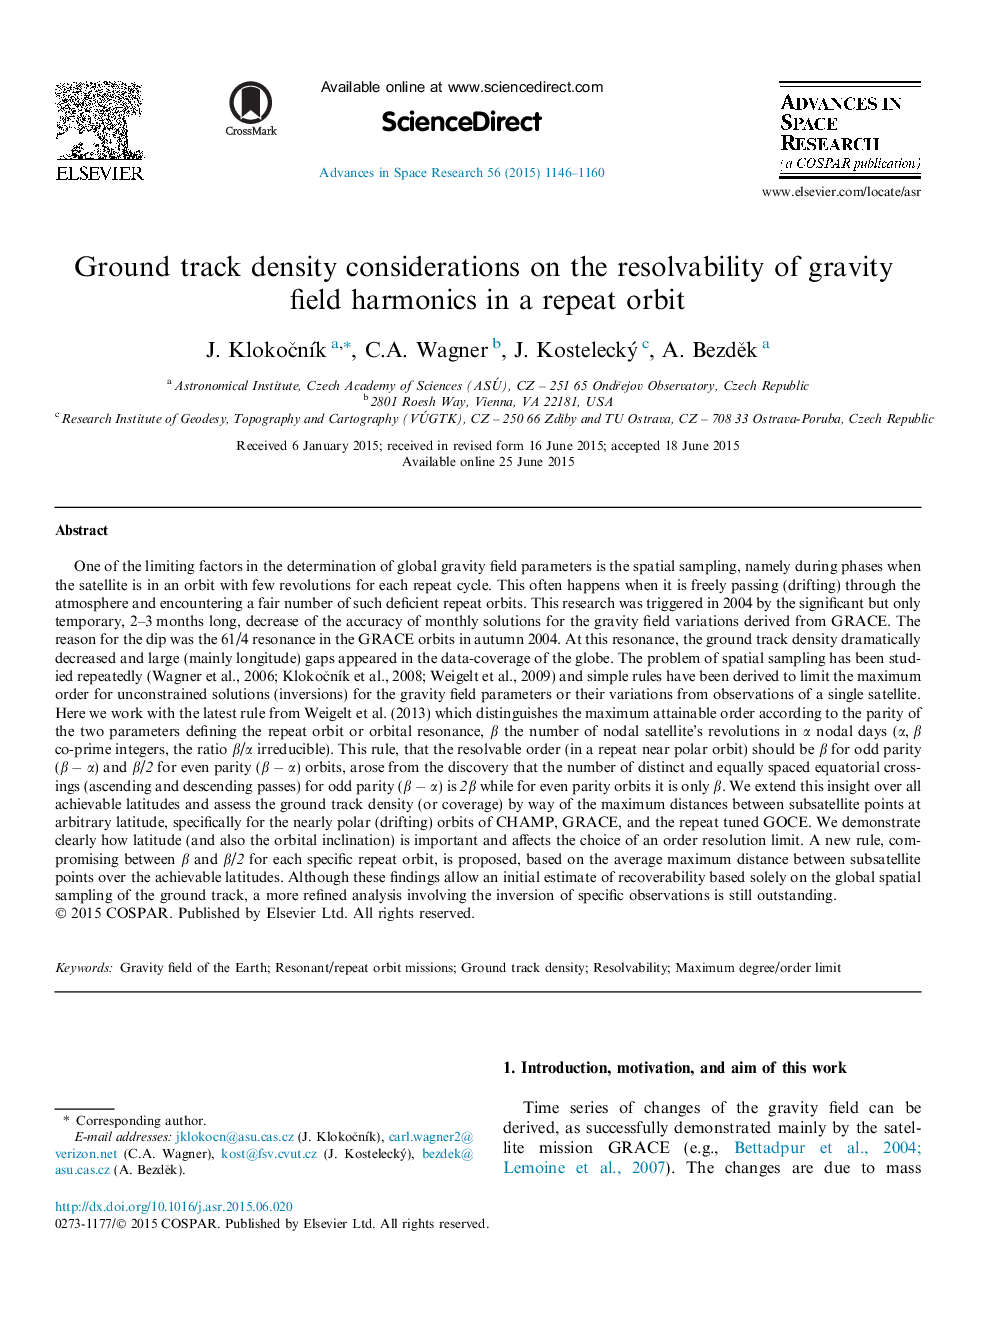 Ground track density considerations on the resolvability of gravity field harmonics in a repeat orbit